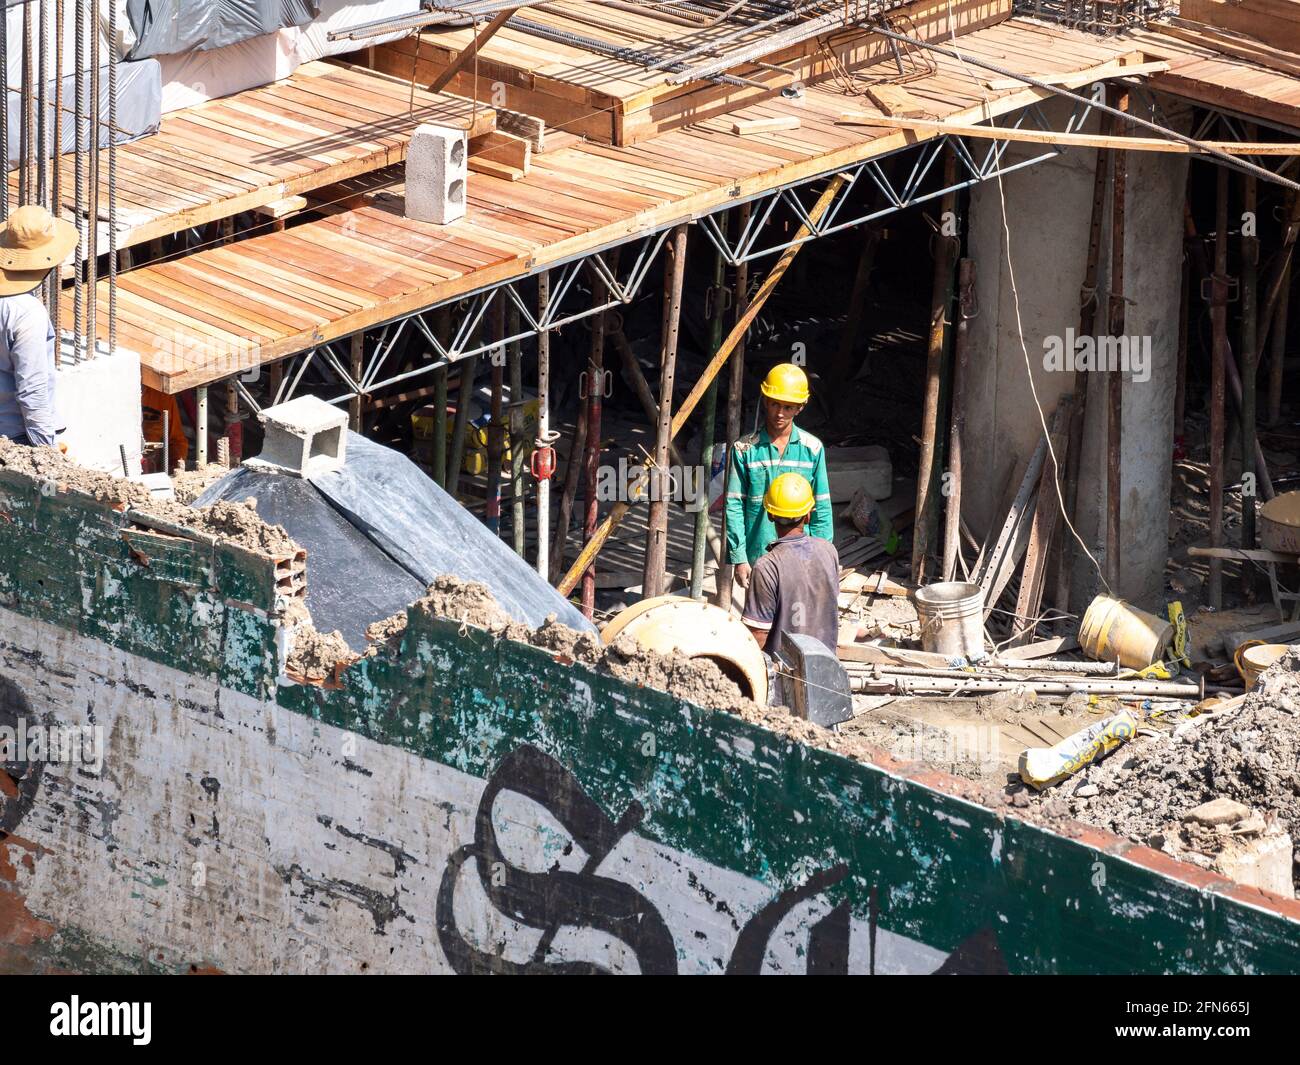 Medellin, Antioquia, Colombia - December 23 2020: Brown Men with Yellow Helmets Resting Among the Residues of a Building Construction Site Stock Photo